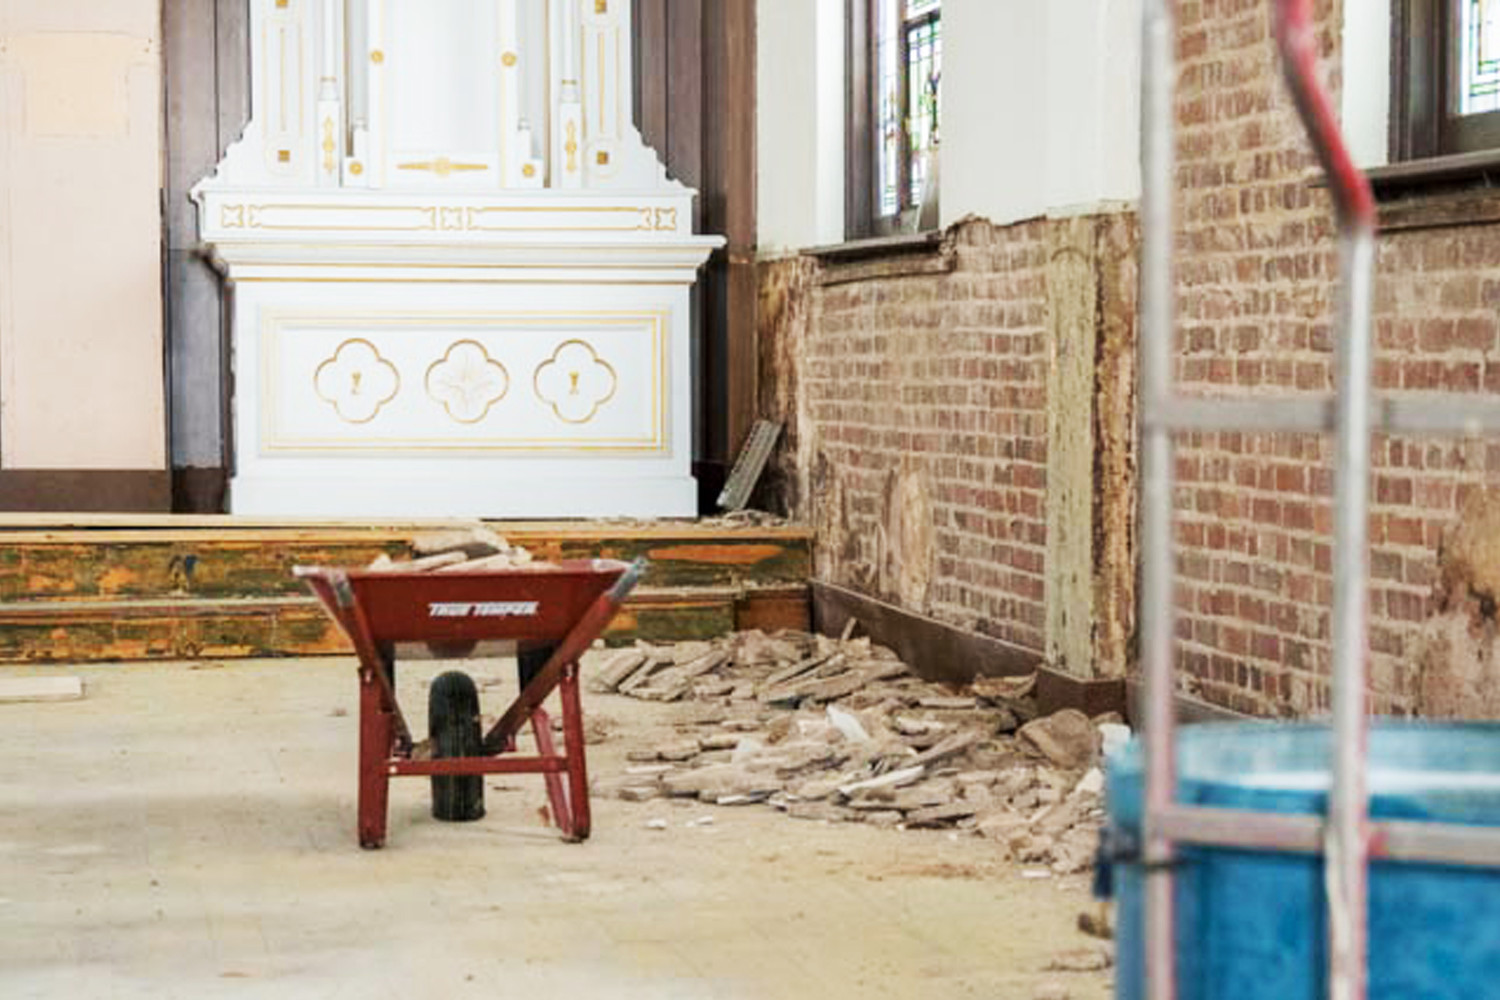 The removal of old wood paneling and plaster revealed the solid brickwork of the 1923-vintage church building.